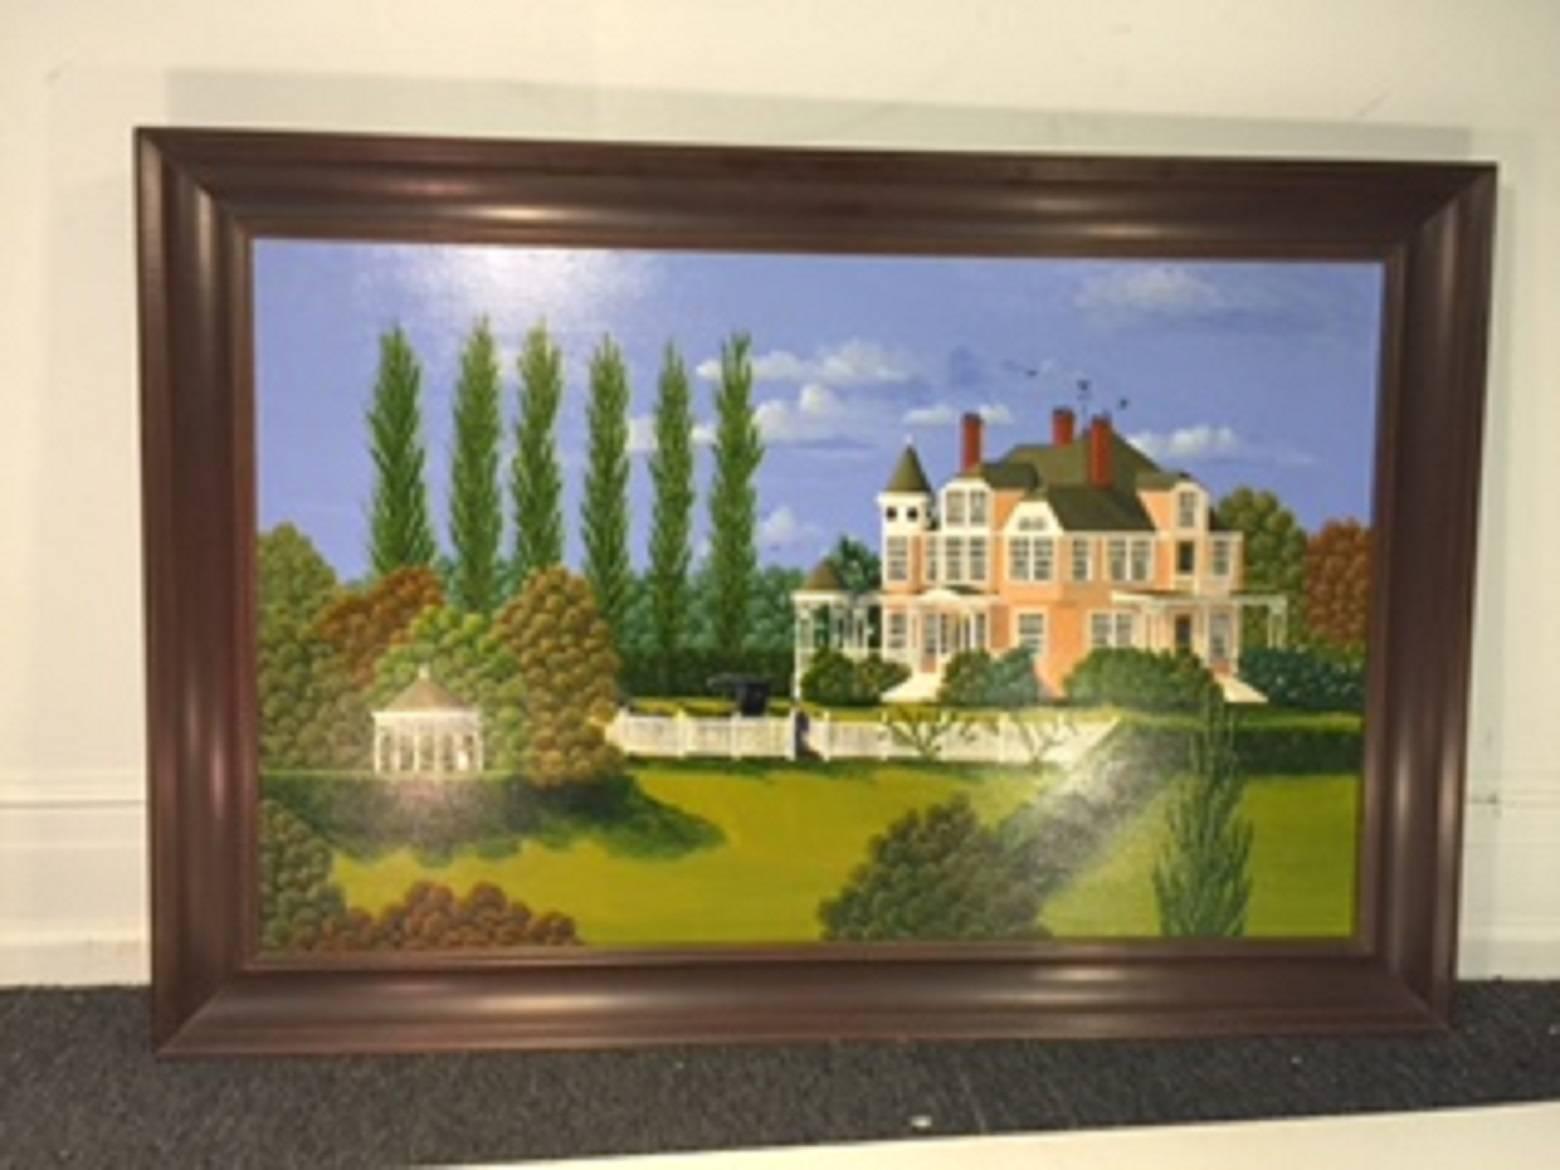 A great Folk Art painting of a plantation by Louisiana artist Dewitt Jones Lobrano. Signed and dated 1980.